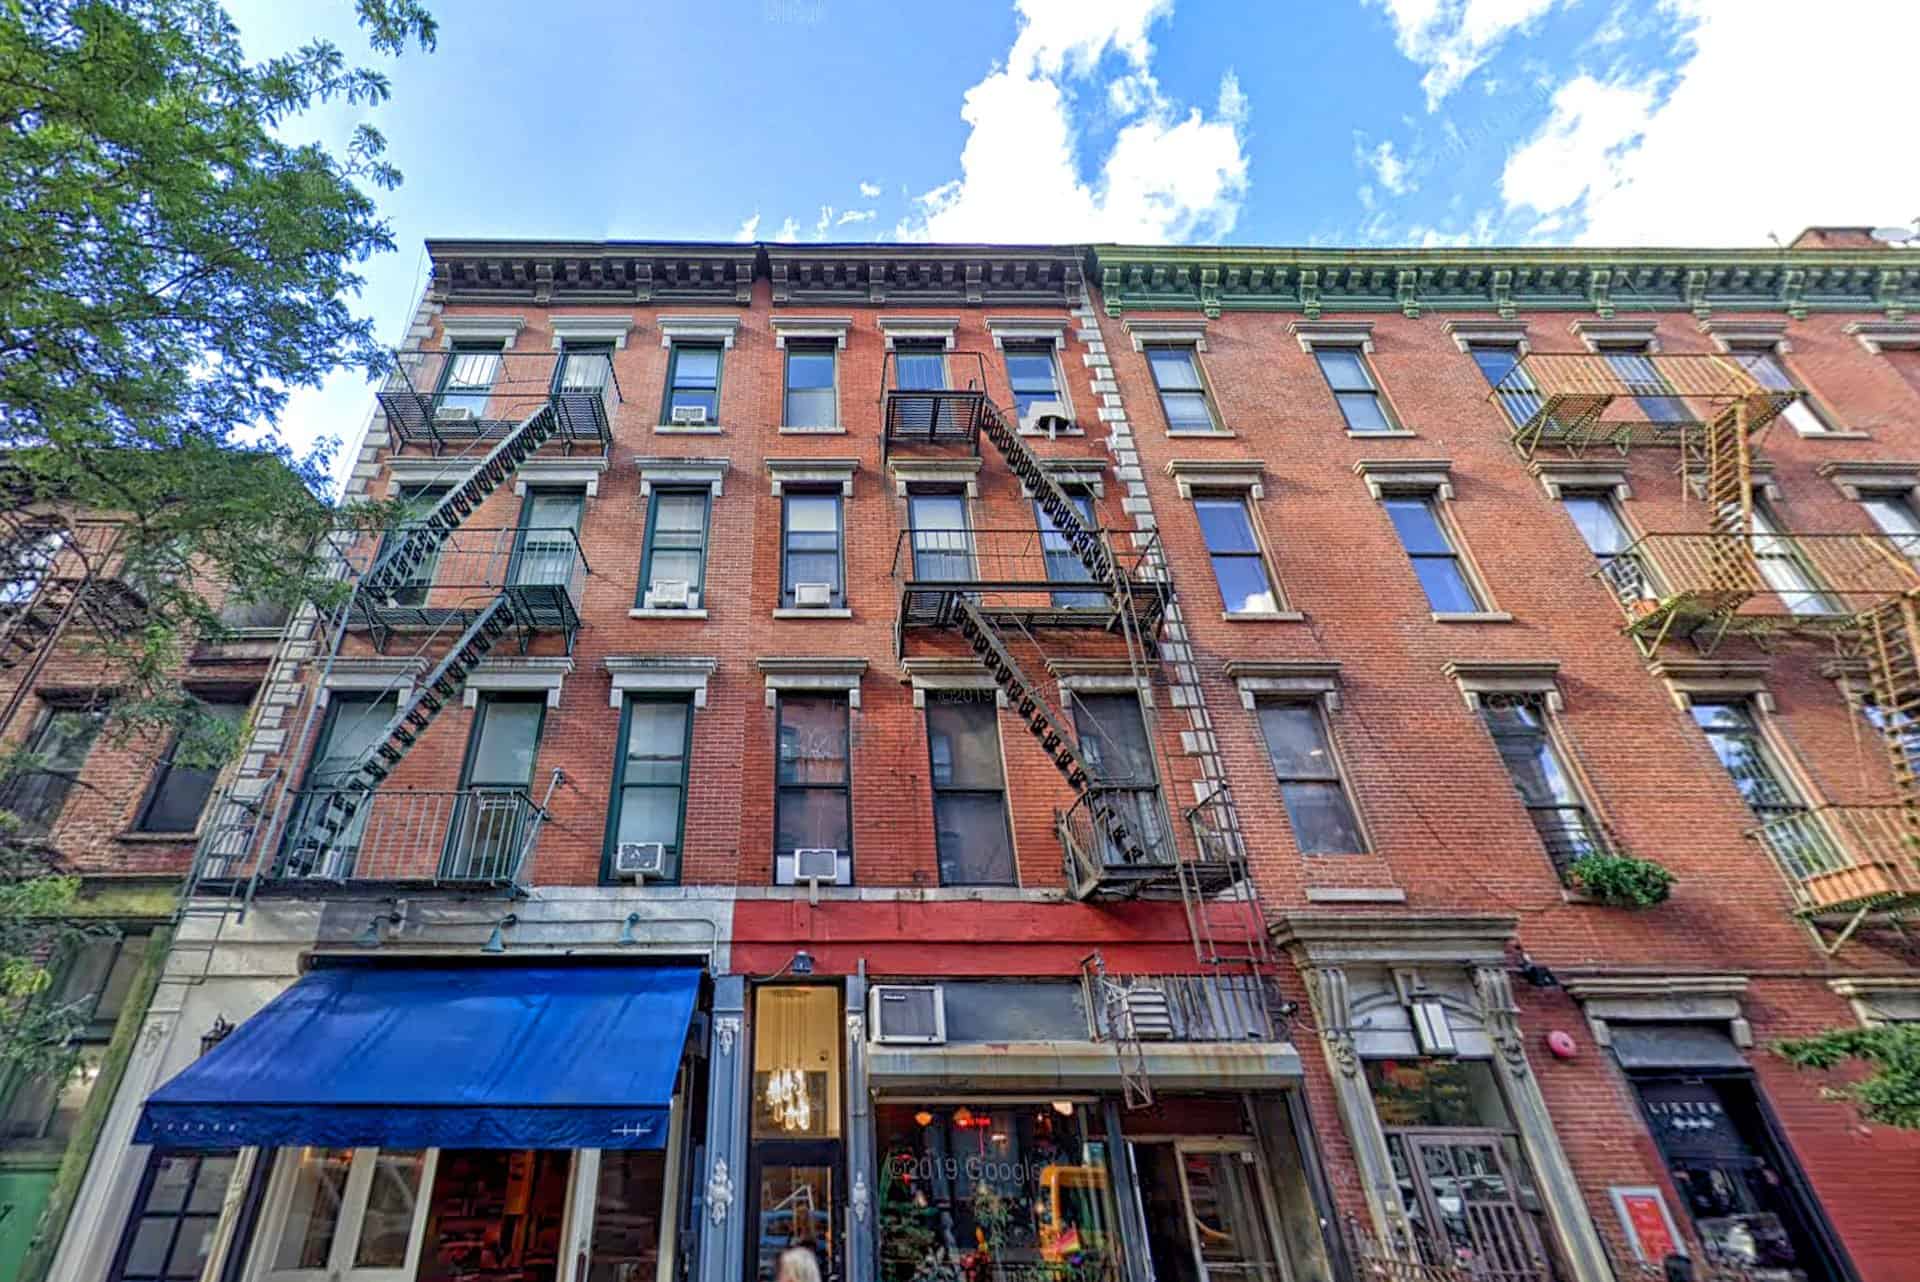 Exterior view of 324 Bowery Street & Bleecker Street in NoHo. Brick apartment building with businesses on the ground floor.